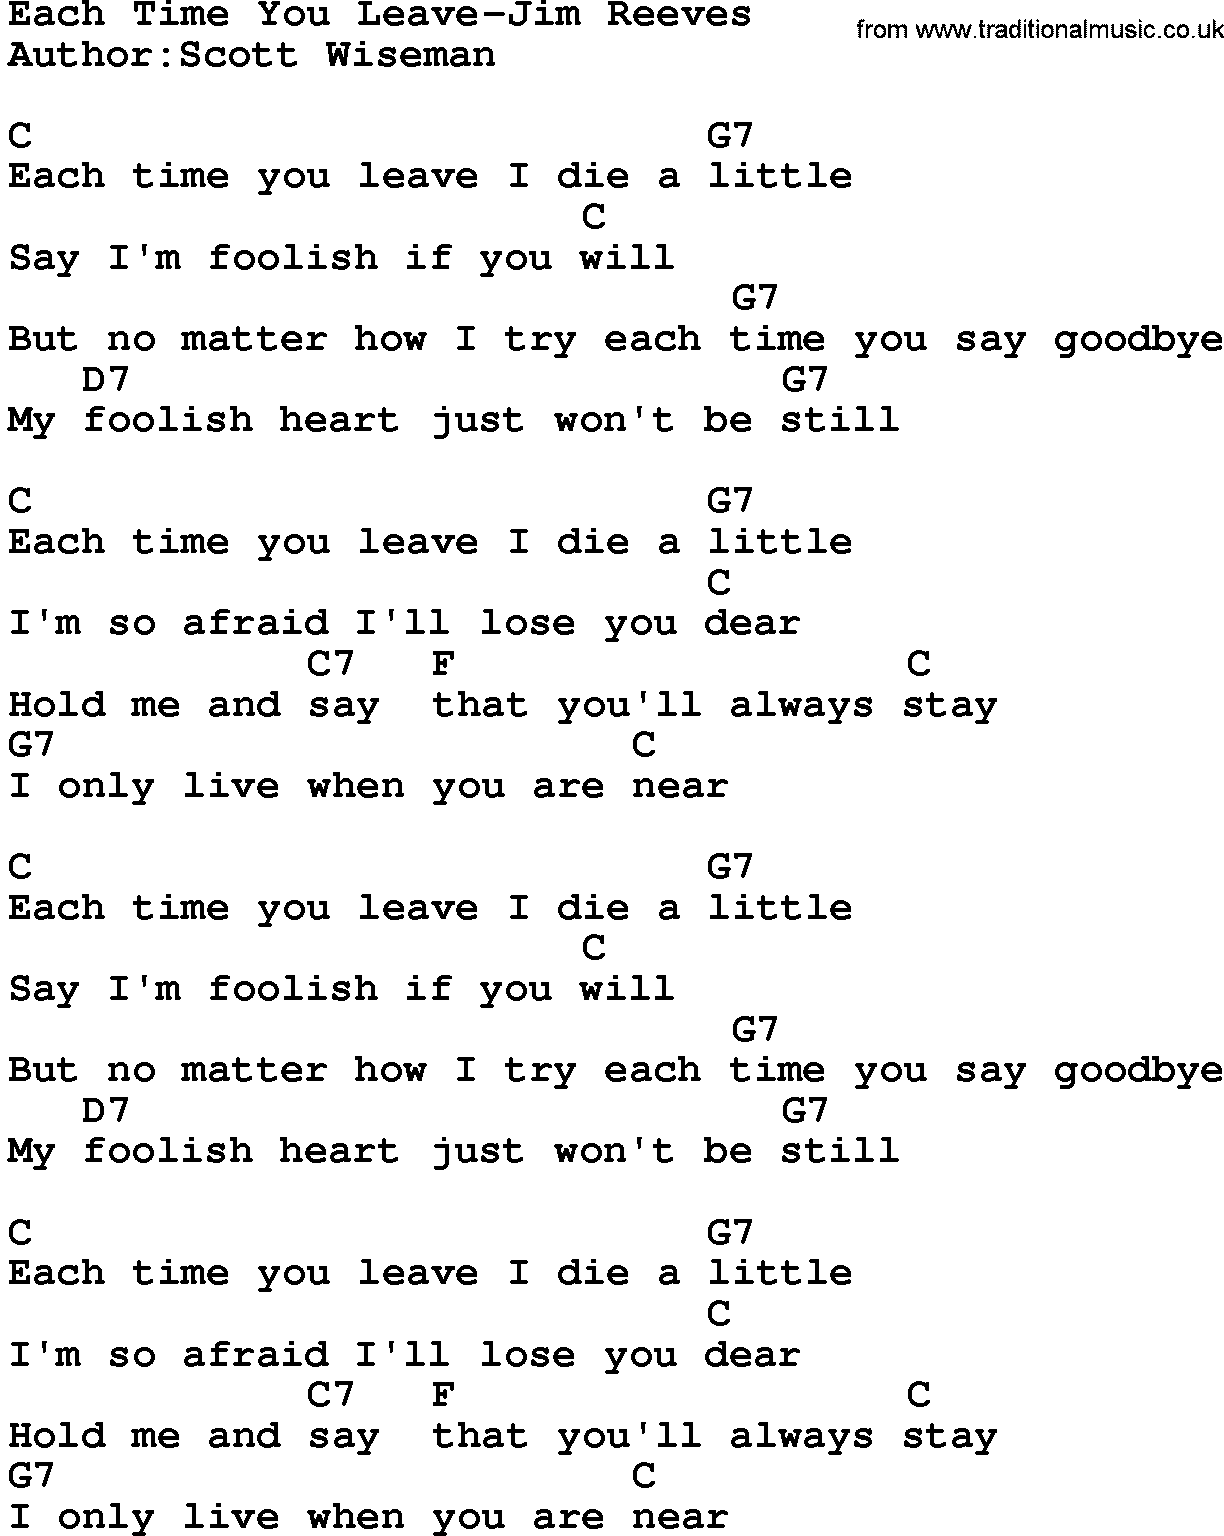 Country music song: Each Time You Leave-Jim Reeves lyrics and chords